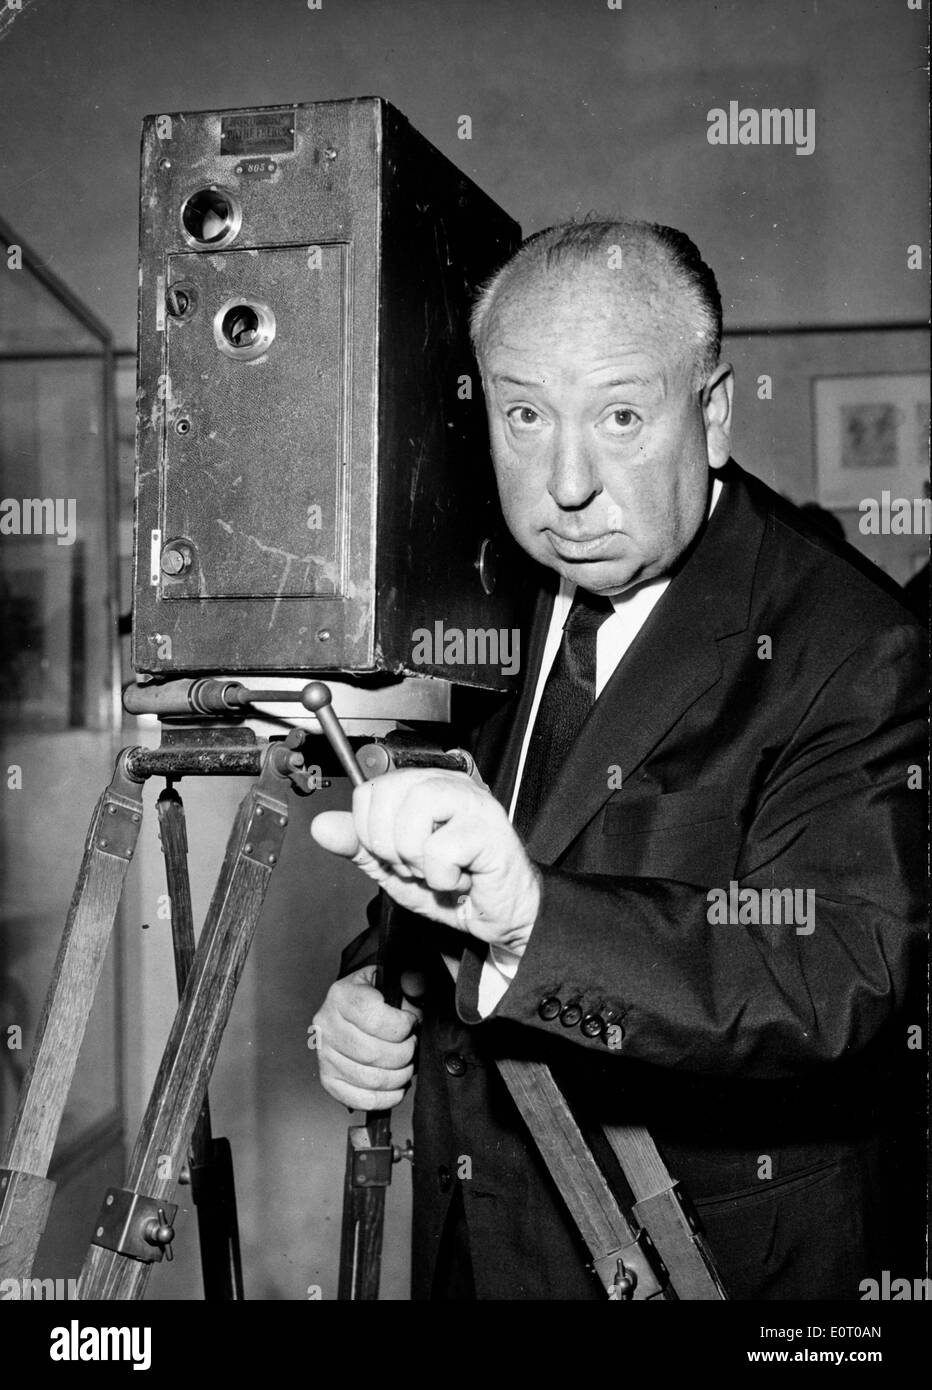 Film maker Alfred Hitchcock standing with a camera Stock Photo